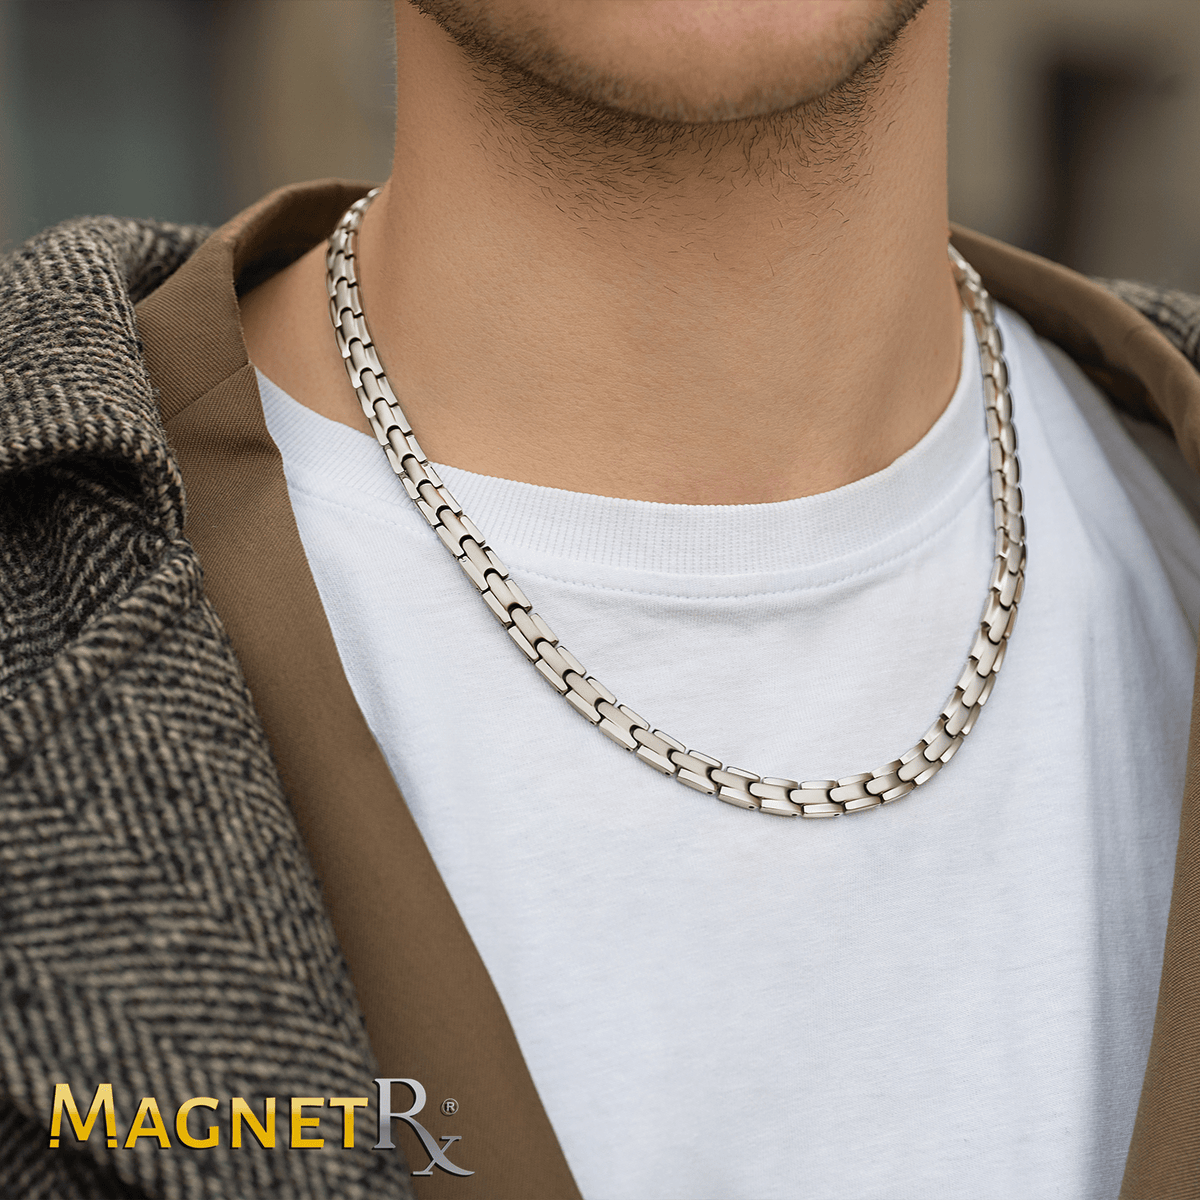 Magnetic Sports Necklace For Athletes